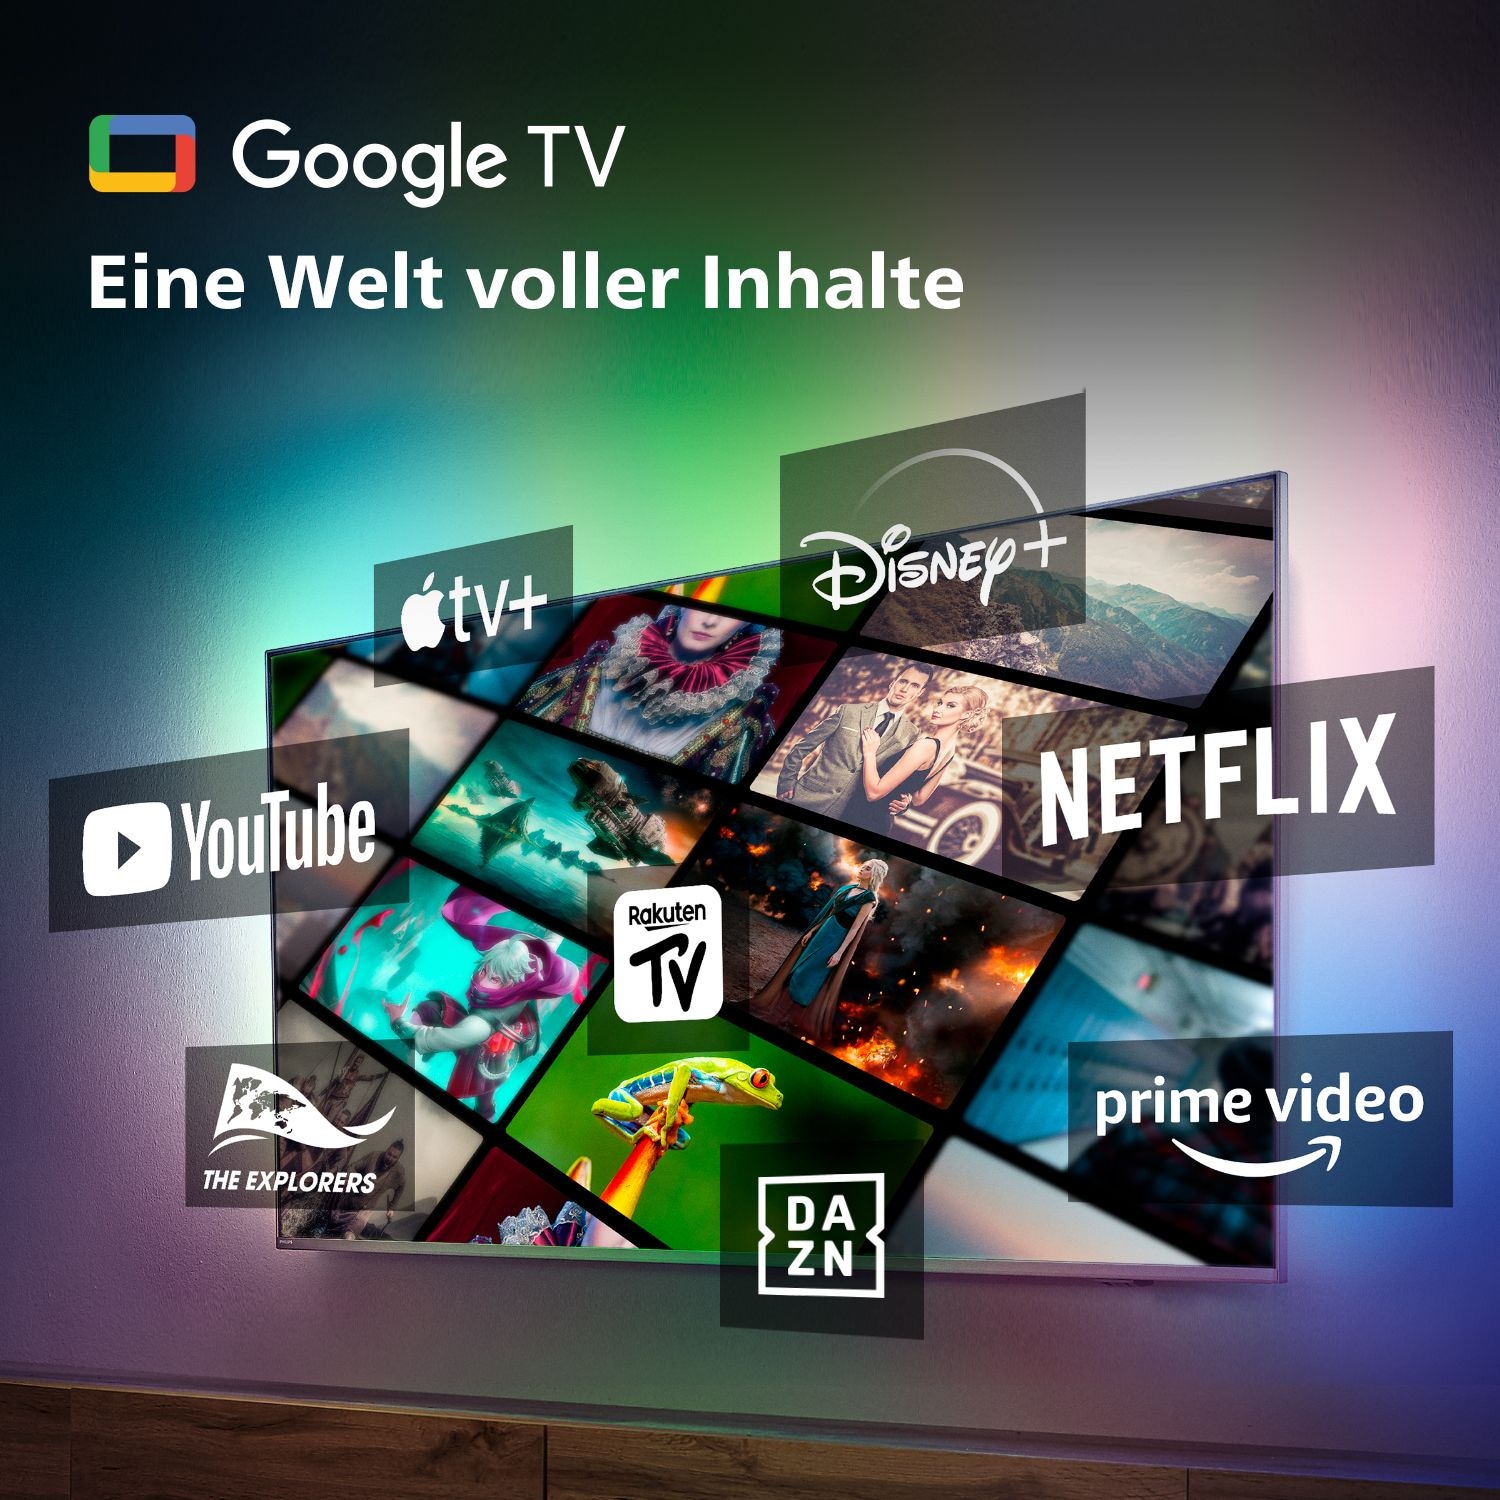 Philips LED-Fernseher cm/65 OTTO bei TV-Smart-TV-Google Android kaufen 4K TV 164 Zoll, »65PUS8808/12«, HD, Ultra